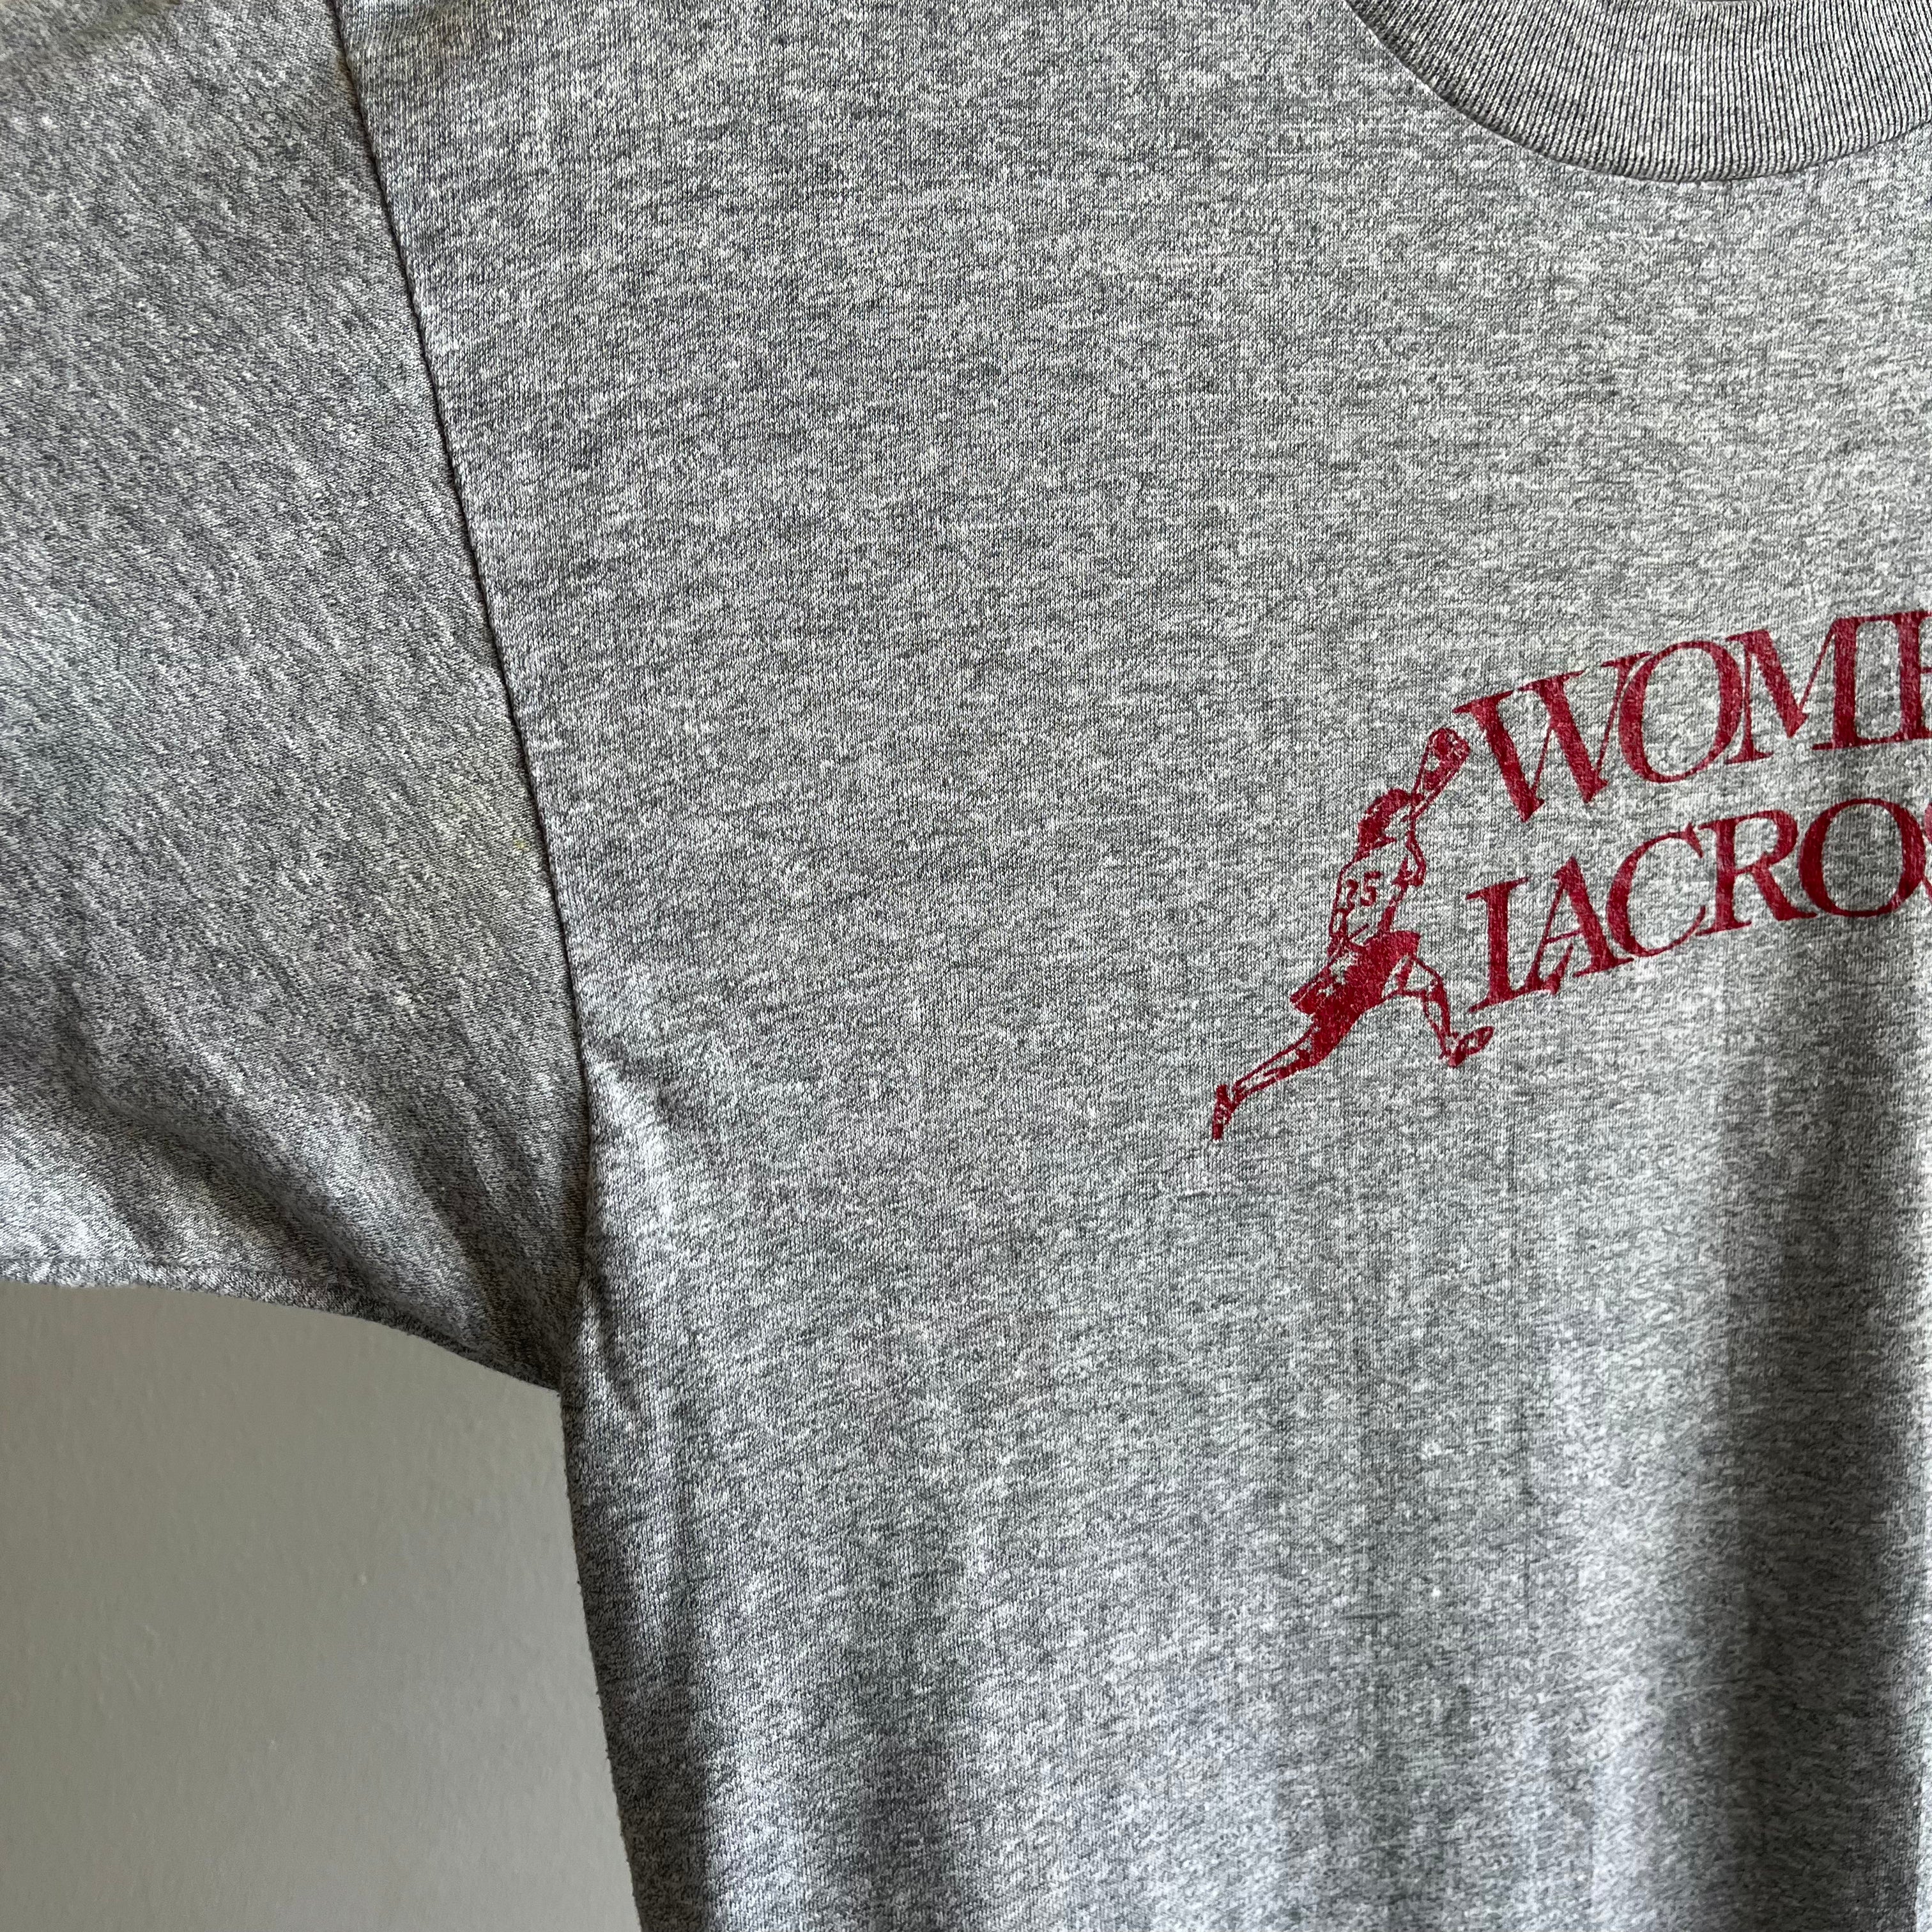 1970s Women's Lacrosse T-Shirt by Artex - Collectible